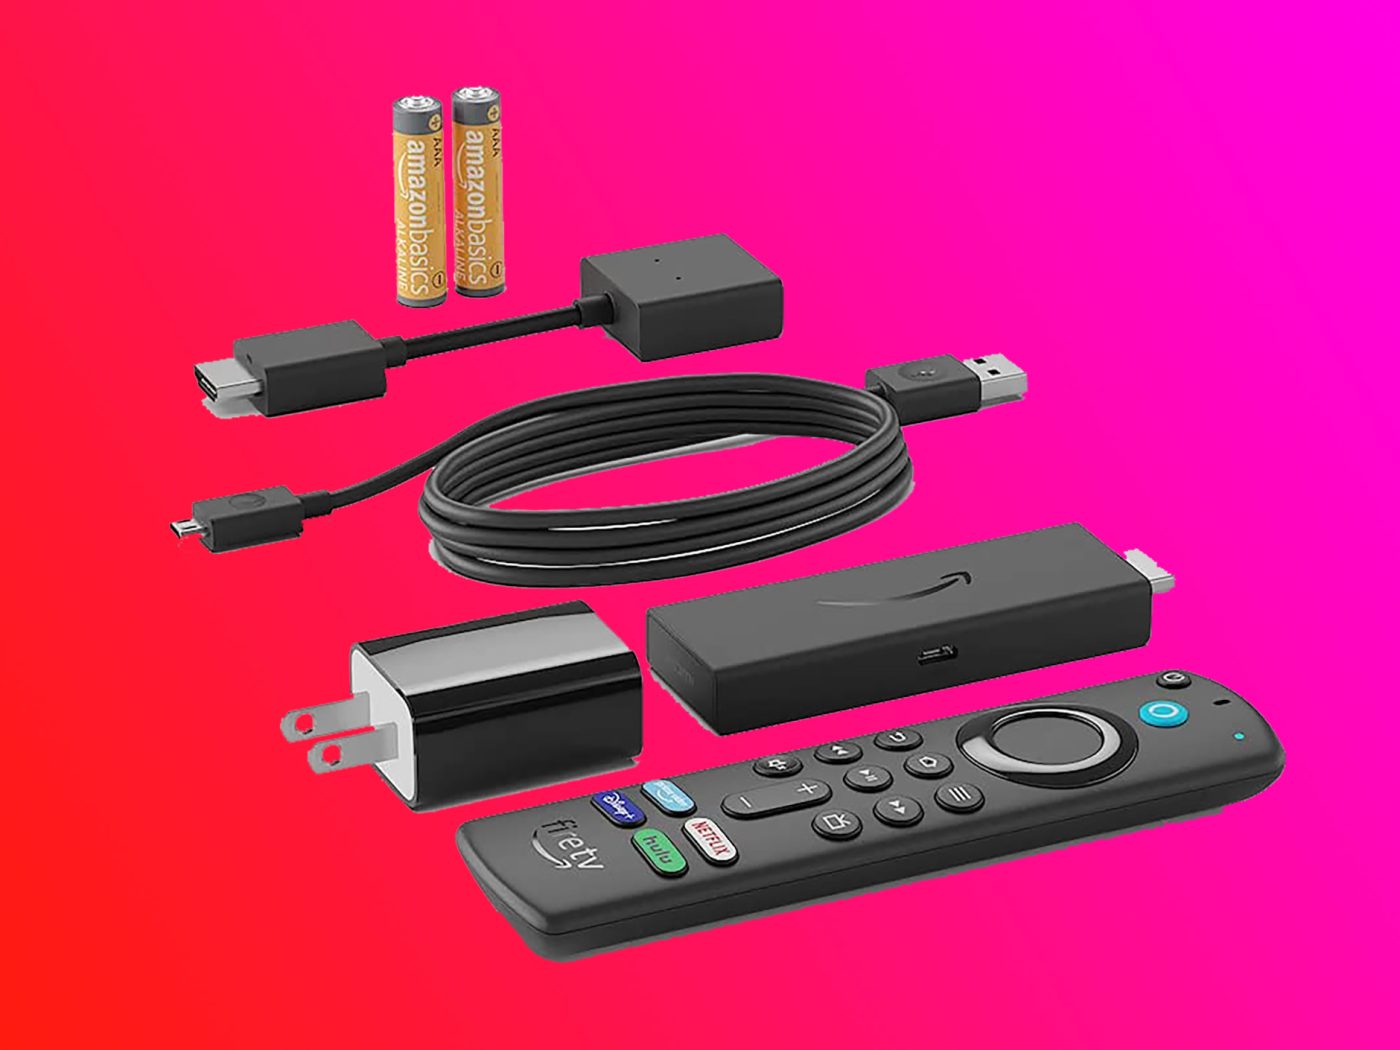 Last chance! Don't miss 's Fire TV Stick 4K for half price